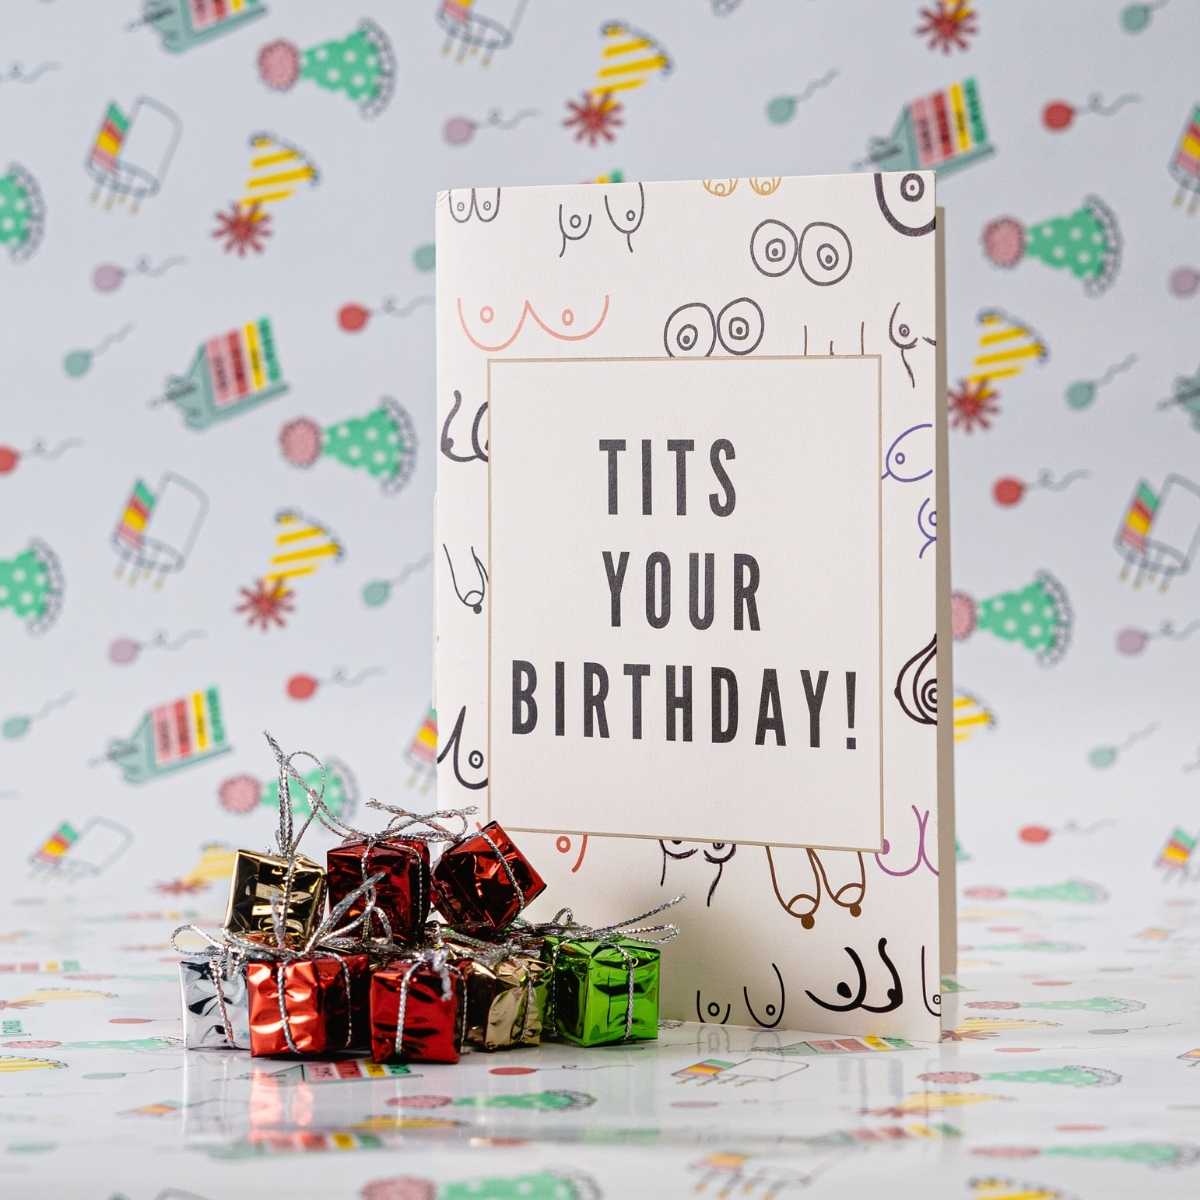 Rude Birthday Card - Tits Your Birthday Pranks Anonymous send hilarious pranks and gag gifts to your friends or family.